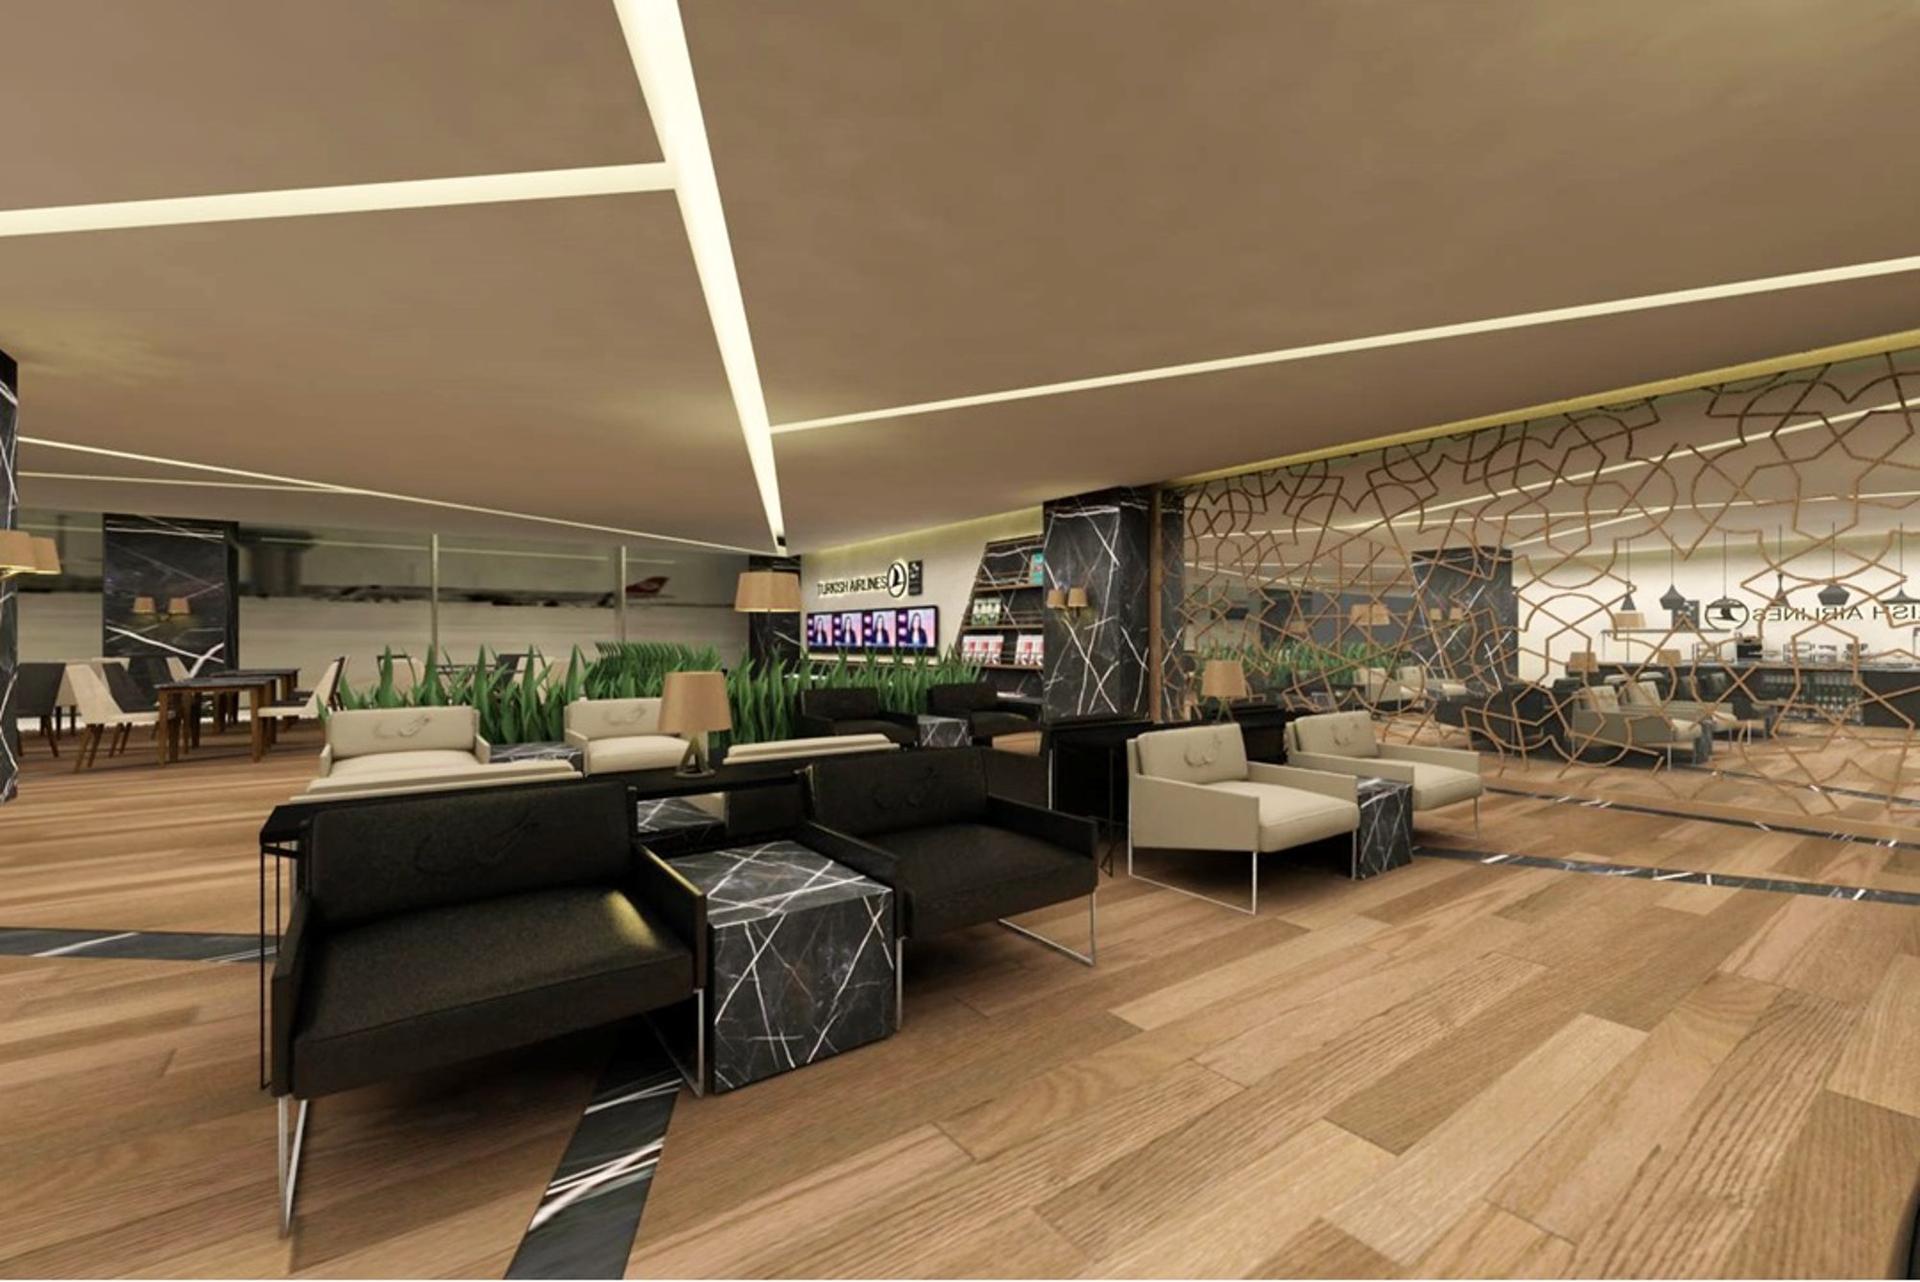 Turkish Airlines CIP Lounge (Business Lounge) image 12 of 27